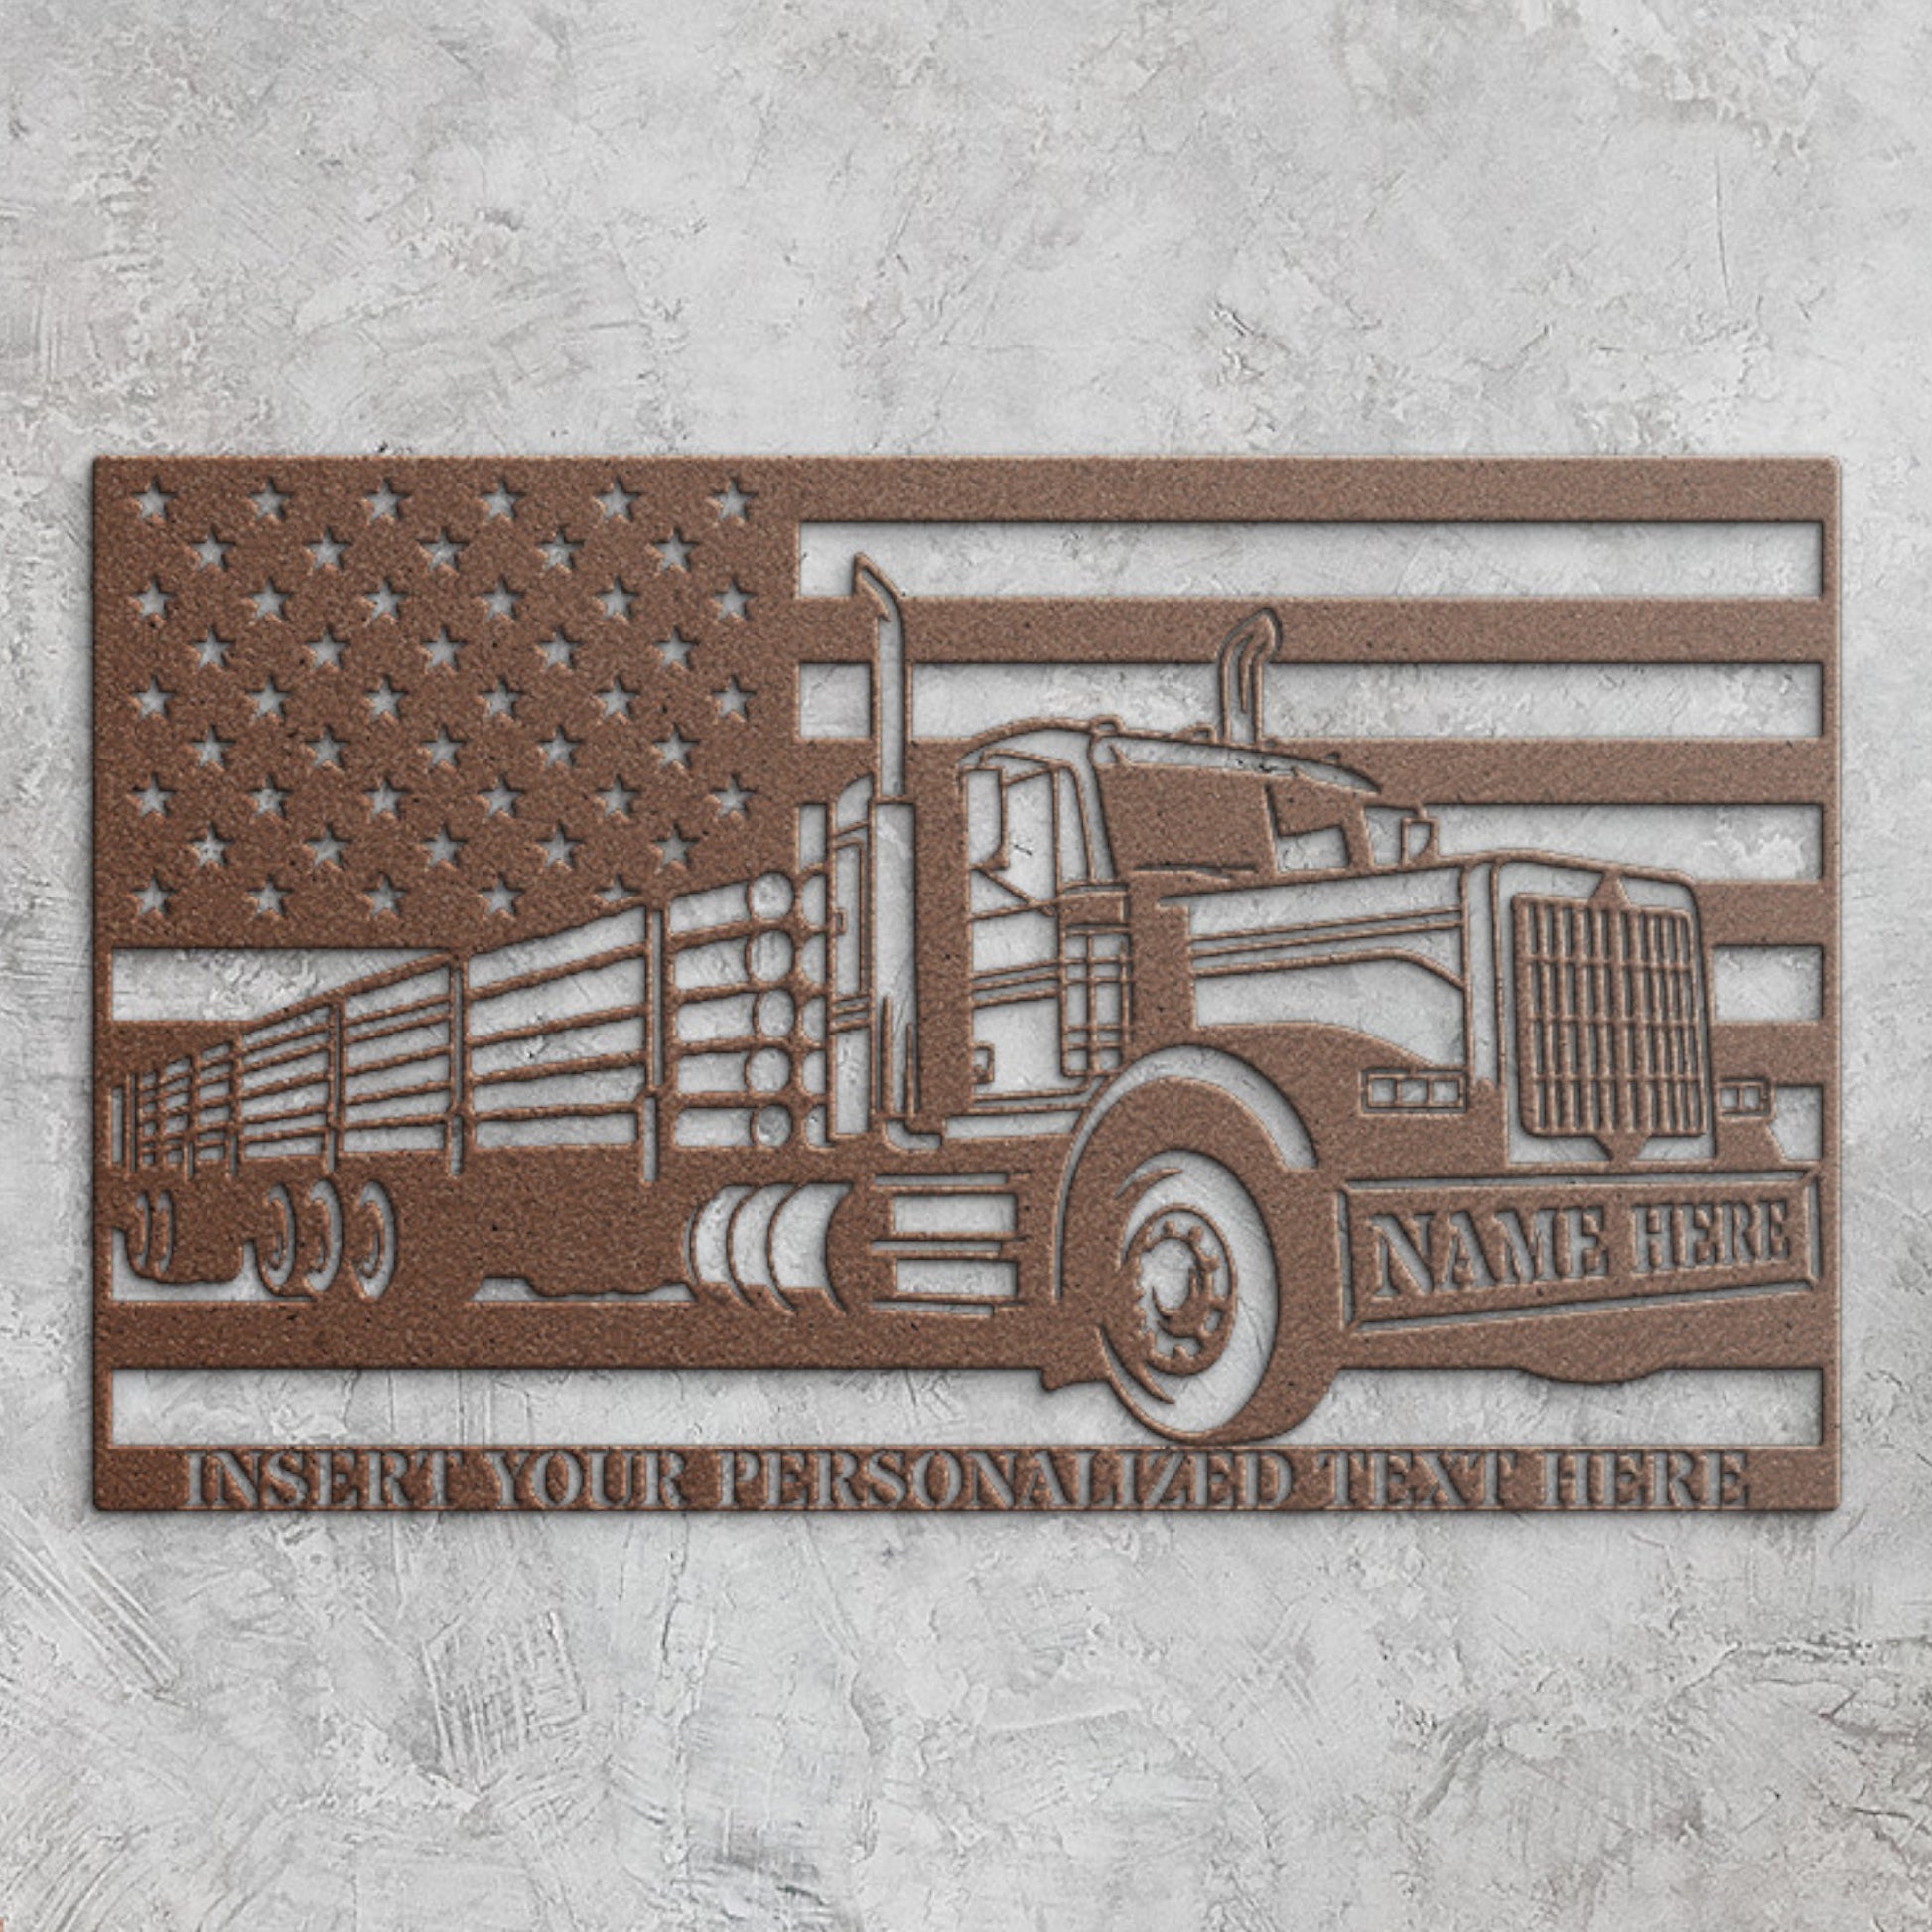 Personalized American Timber Truck Name Metal Sign. Custom US Log Lorry Wall Decor. Patriotic Woodworker Gift. US Logger. Truck Driver Decor